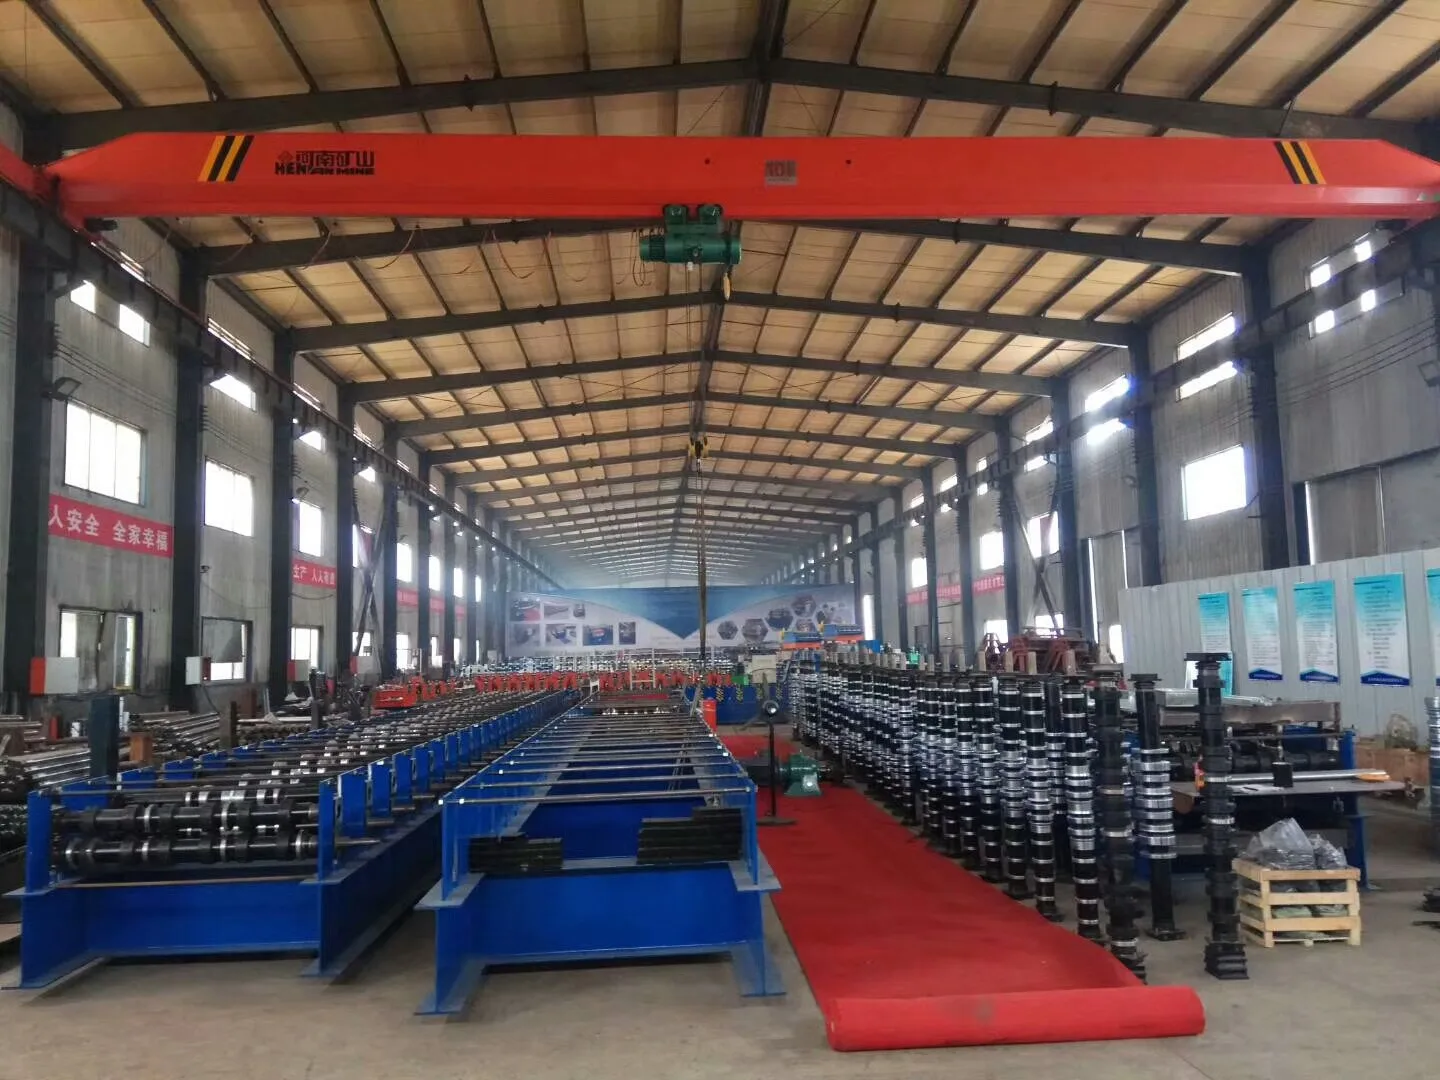 10% discount 850 model corrugated metal roof sheet roll forming machine in stock